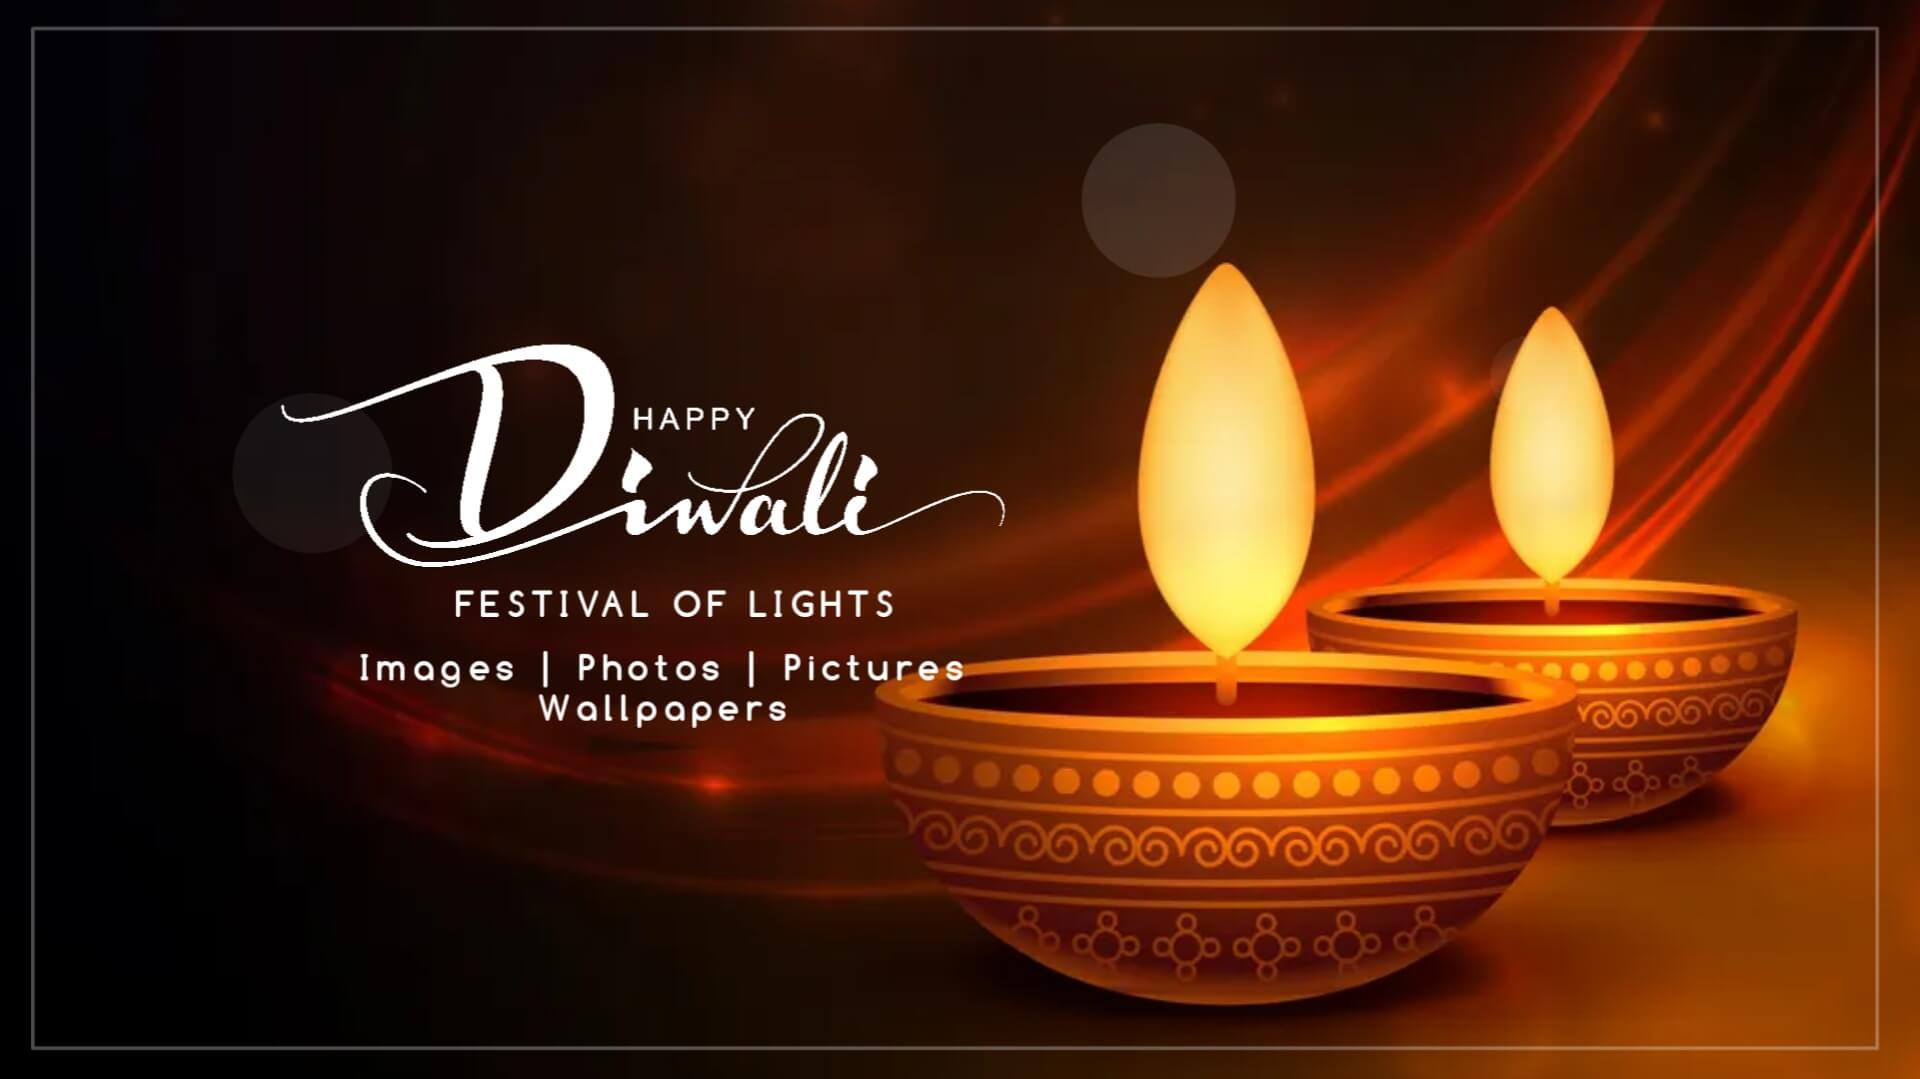 150 BEST Diwali Images Photos Pictures  Wallpapers 2022